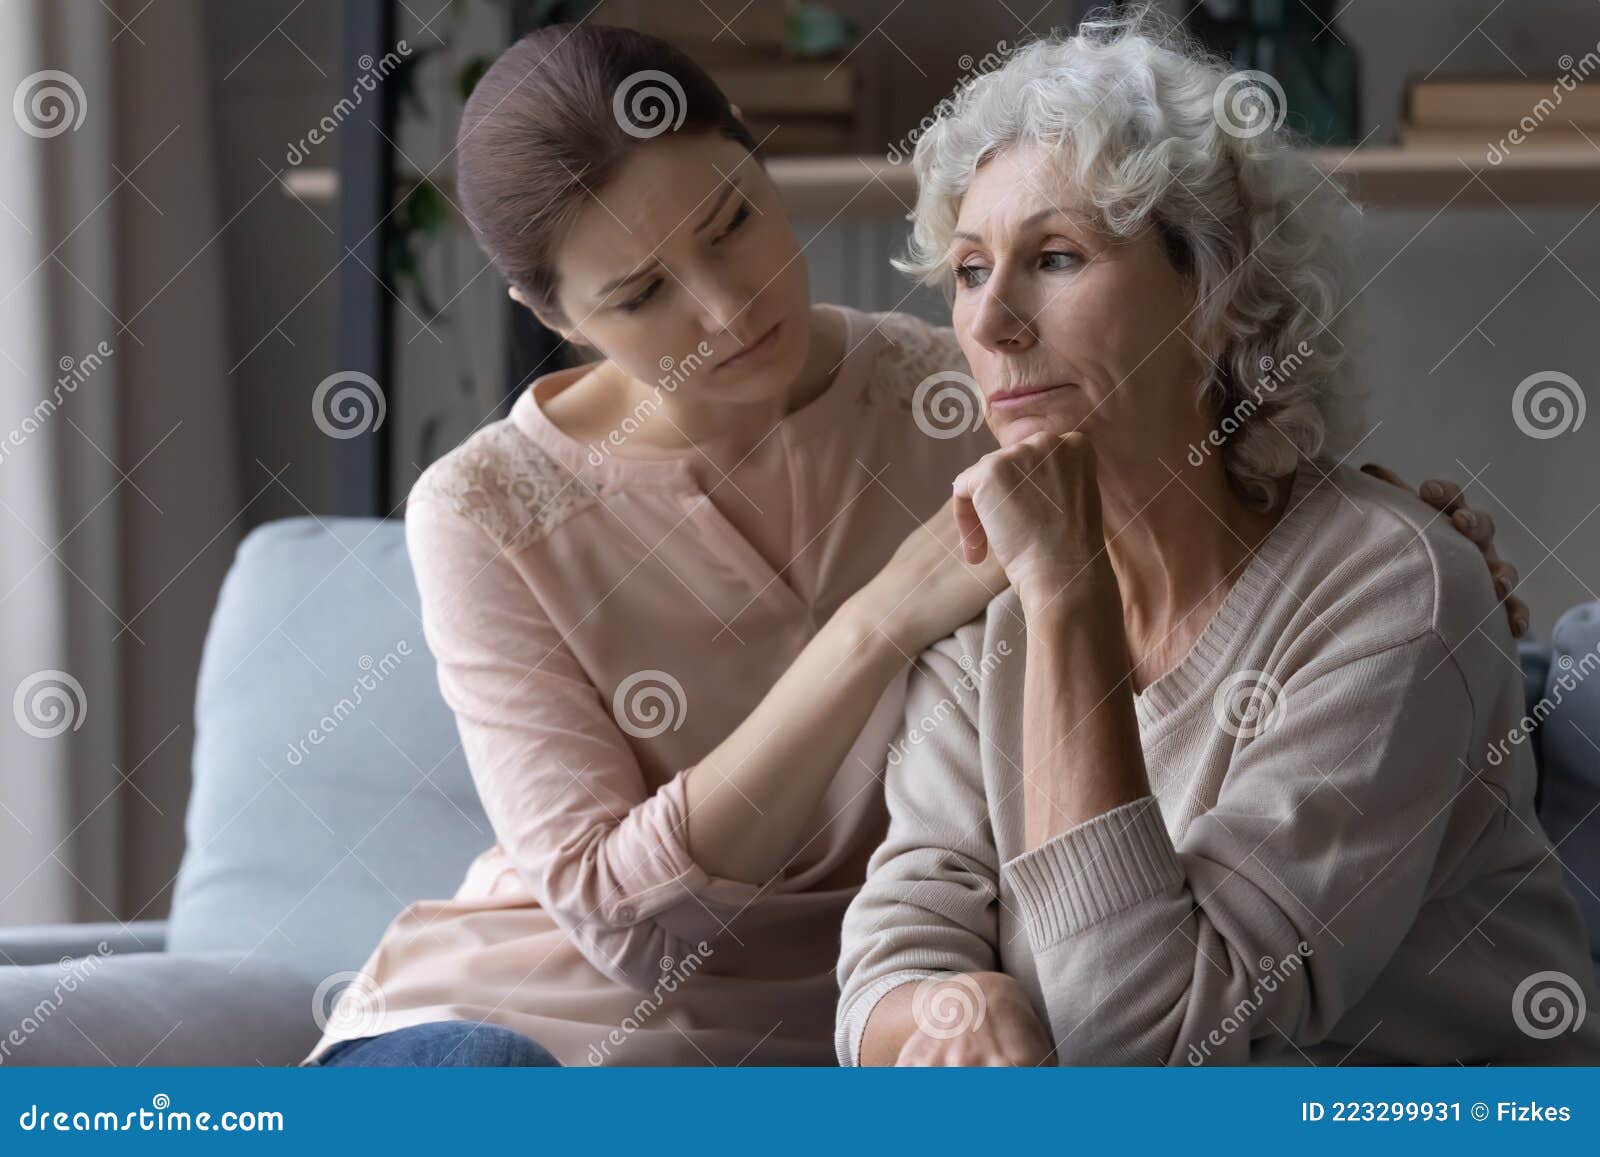 Young Female Caregiver Support Grieving Suffering Mature Old Woman Retiree Stock Image